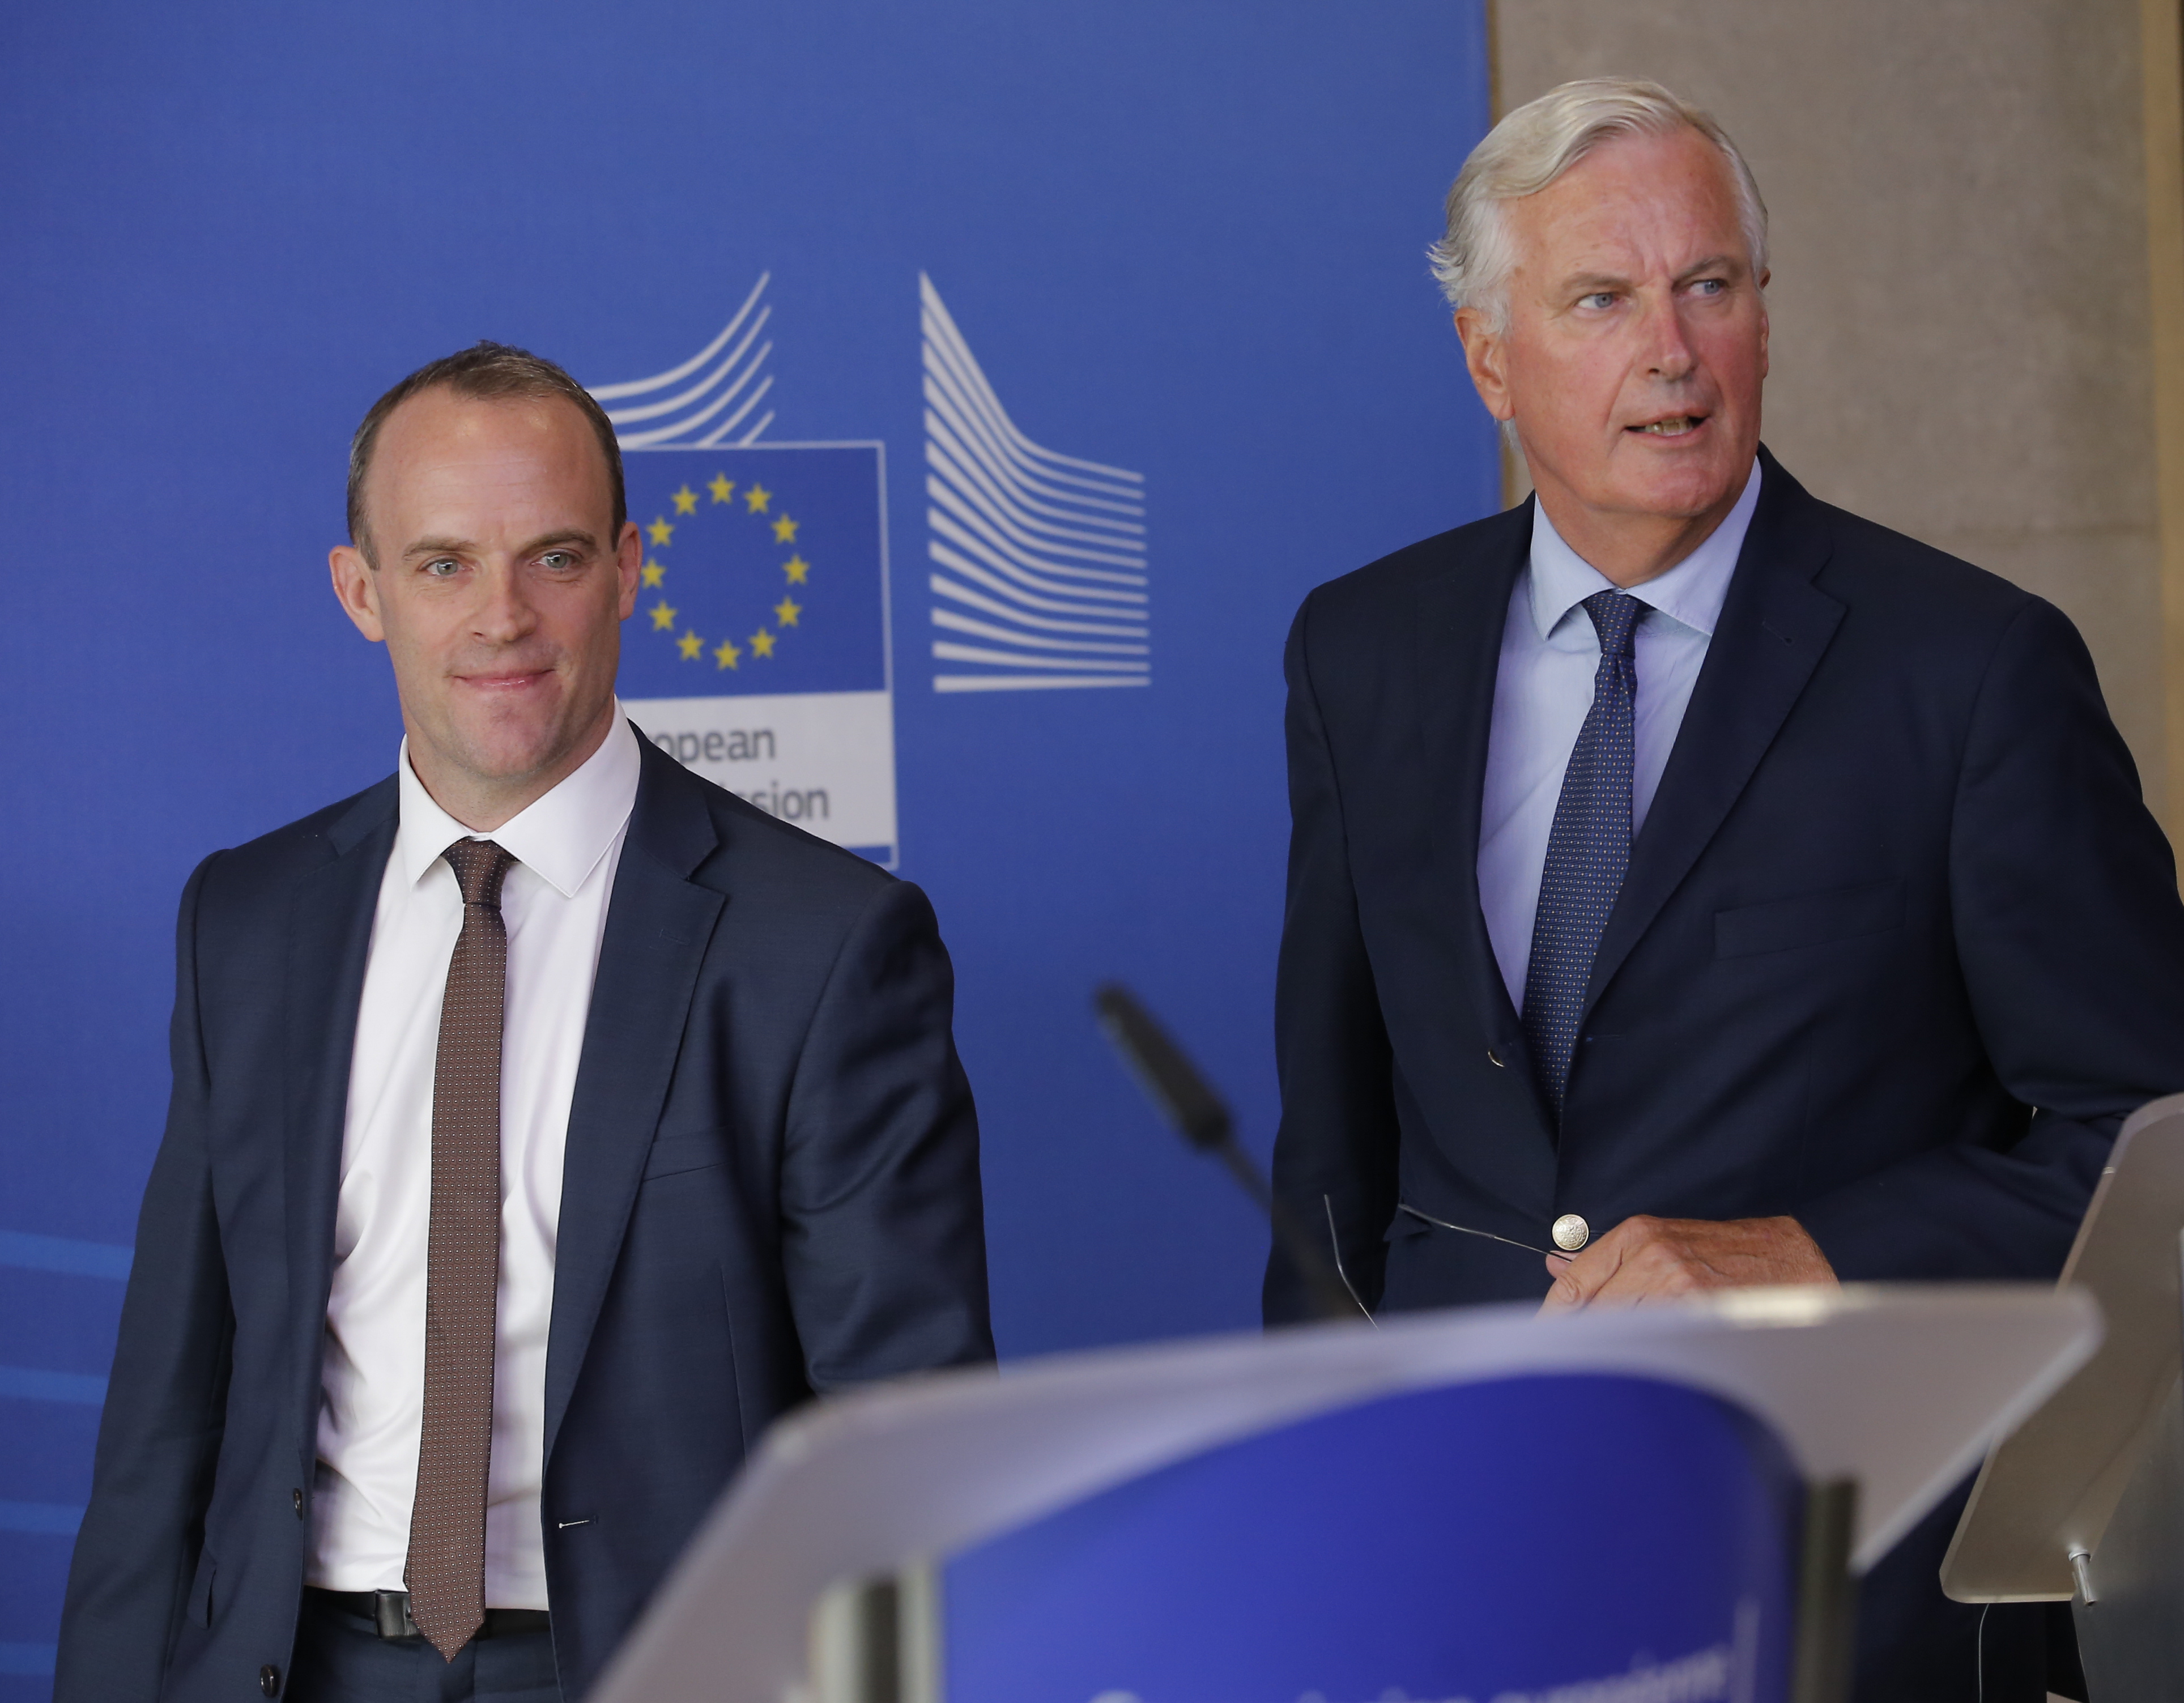 epa06962818 British Government Brexit secretary Dominic Raab (L) and EU's chief Brexit negotiator Michel Barnier give a press conference at the end of a round of talks in Brexit negotiations at the European Commission in Brussels, Belgium, 21 August 2018.  EPA/OLIVIER HOSLET